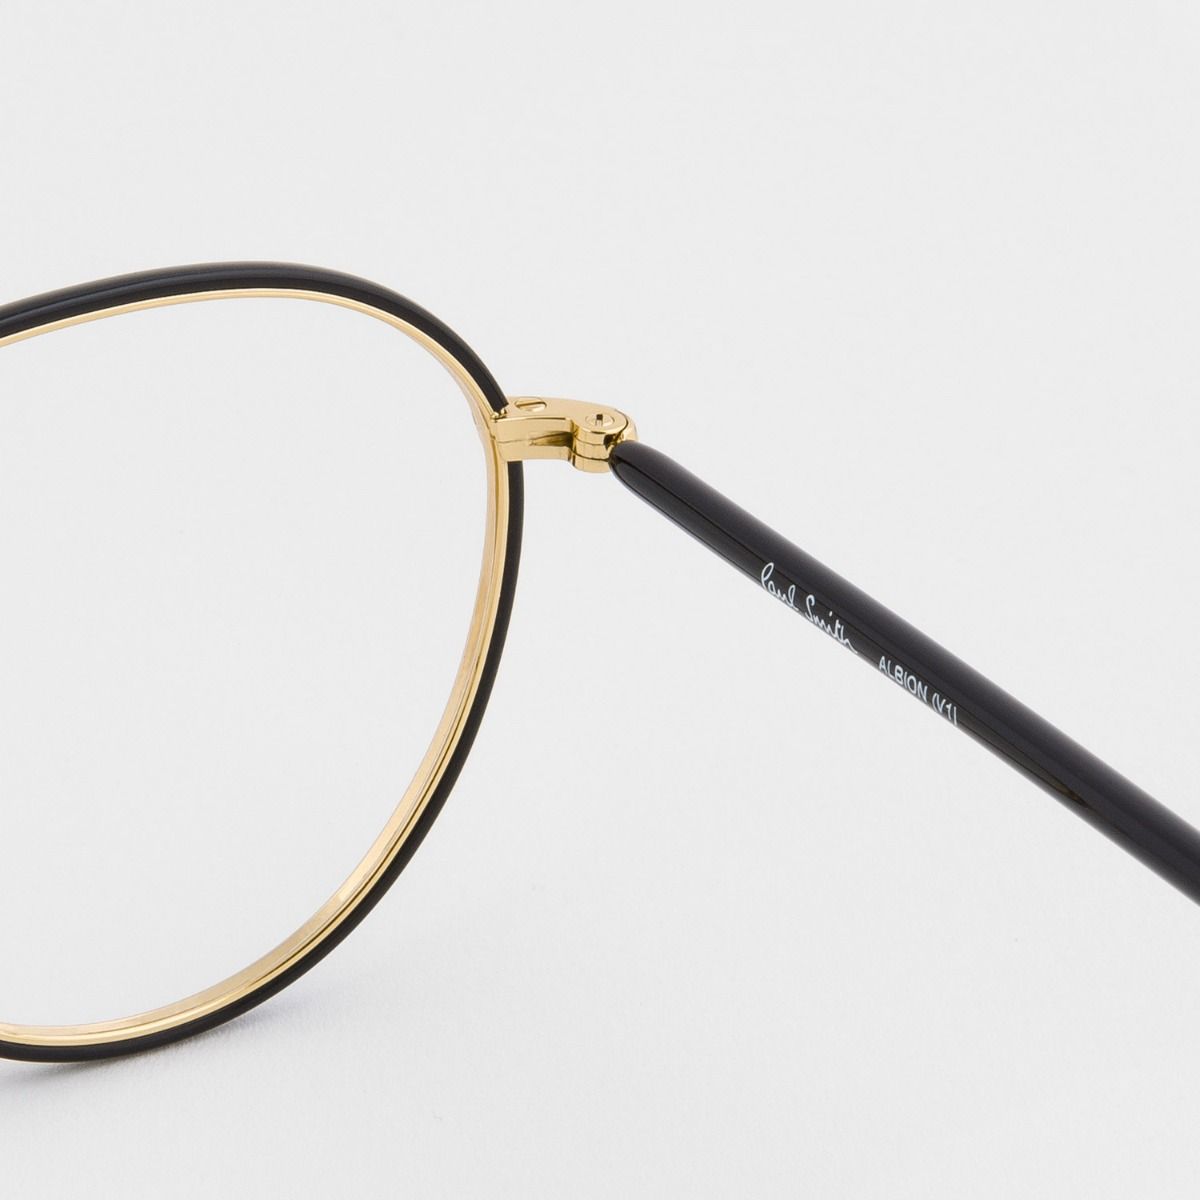 Paul Smith Albion Optical Round Glasses (Small)